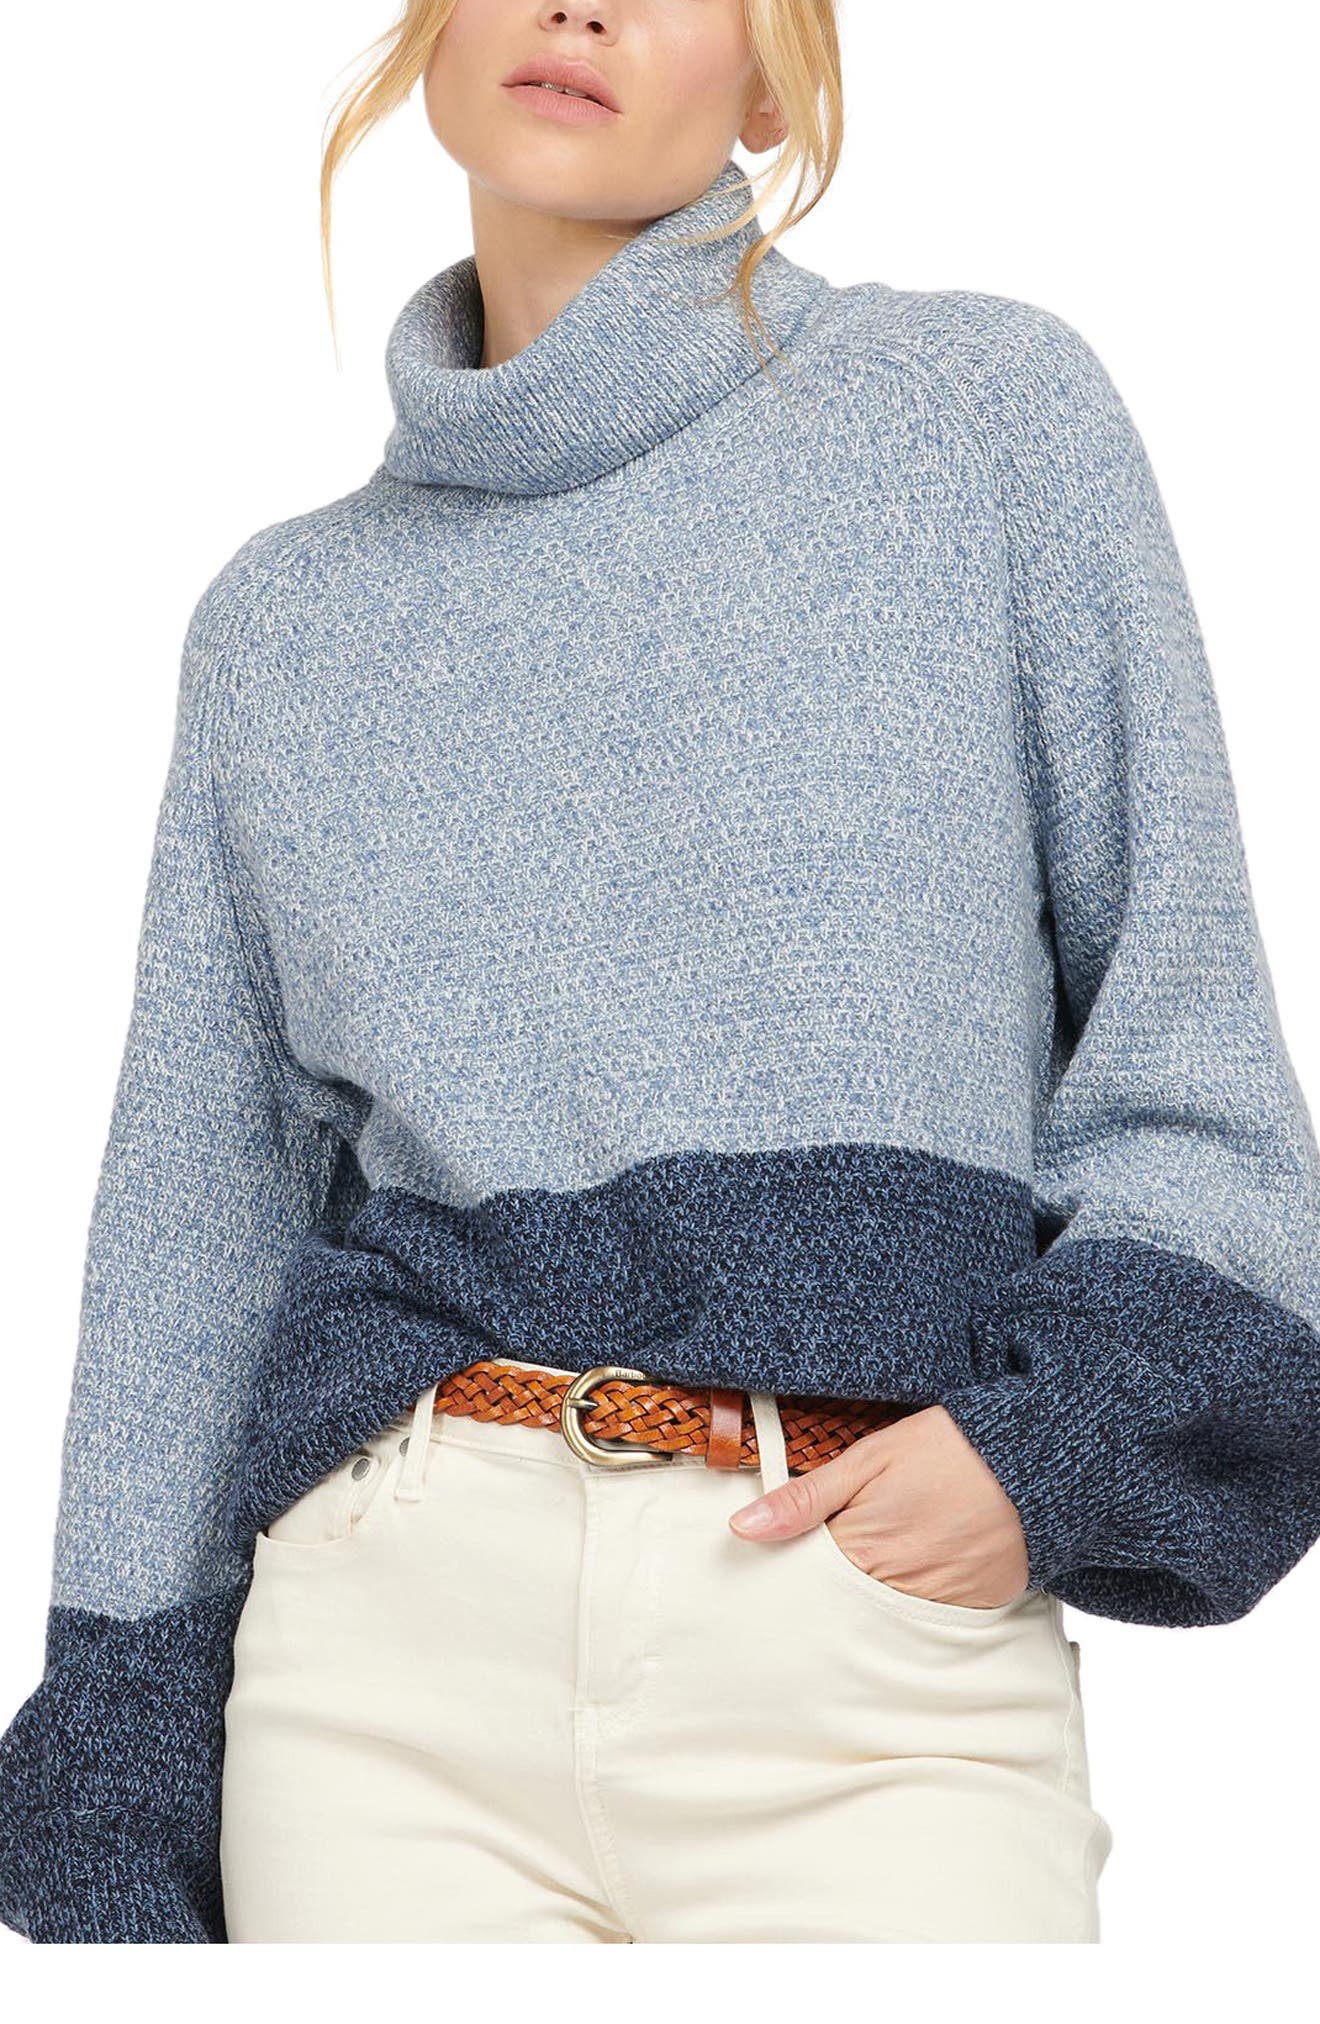 Barbour Cheswick Colorblock Marled Turtleneck Sweater in Navy at Nordstrom